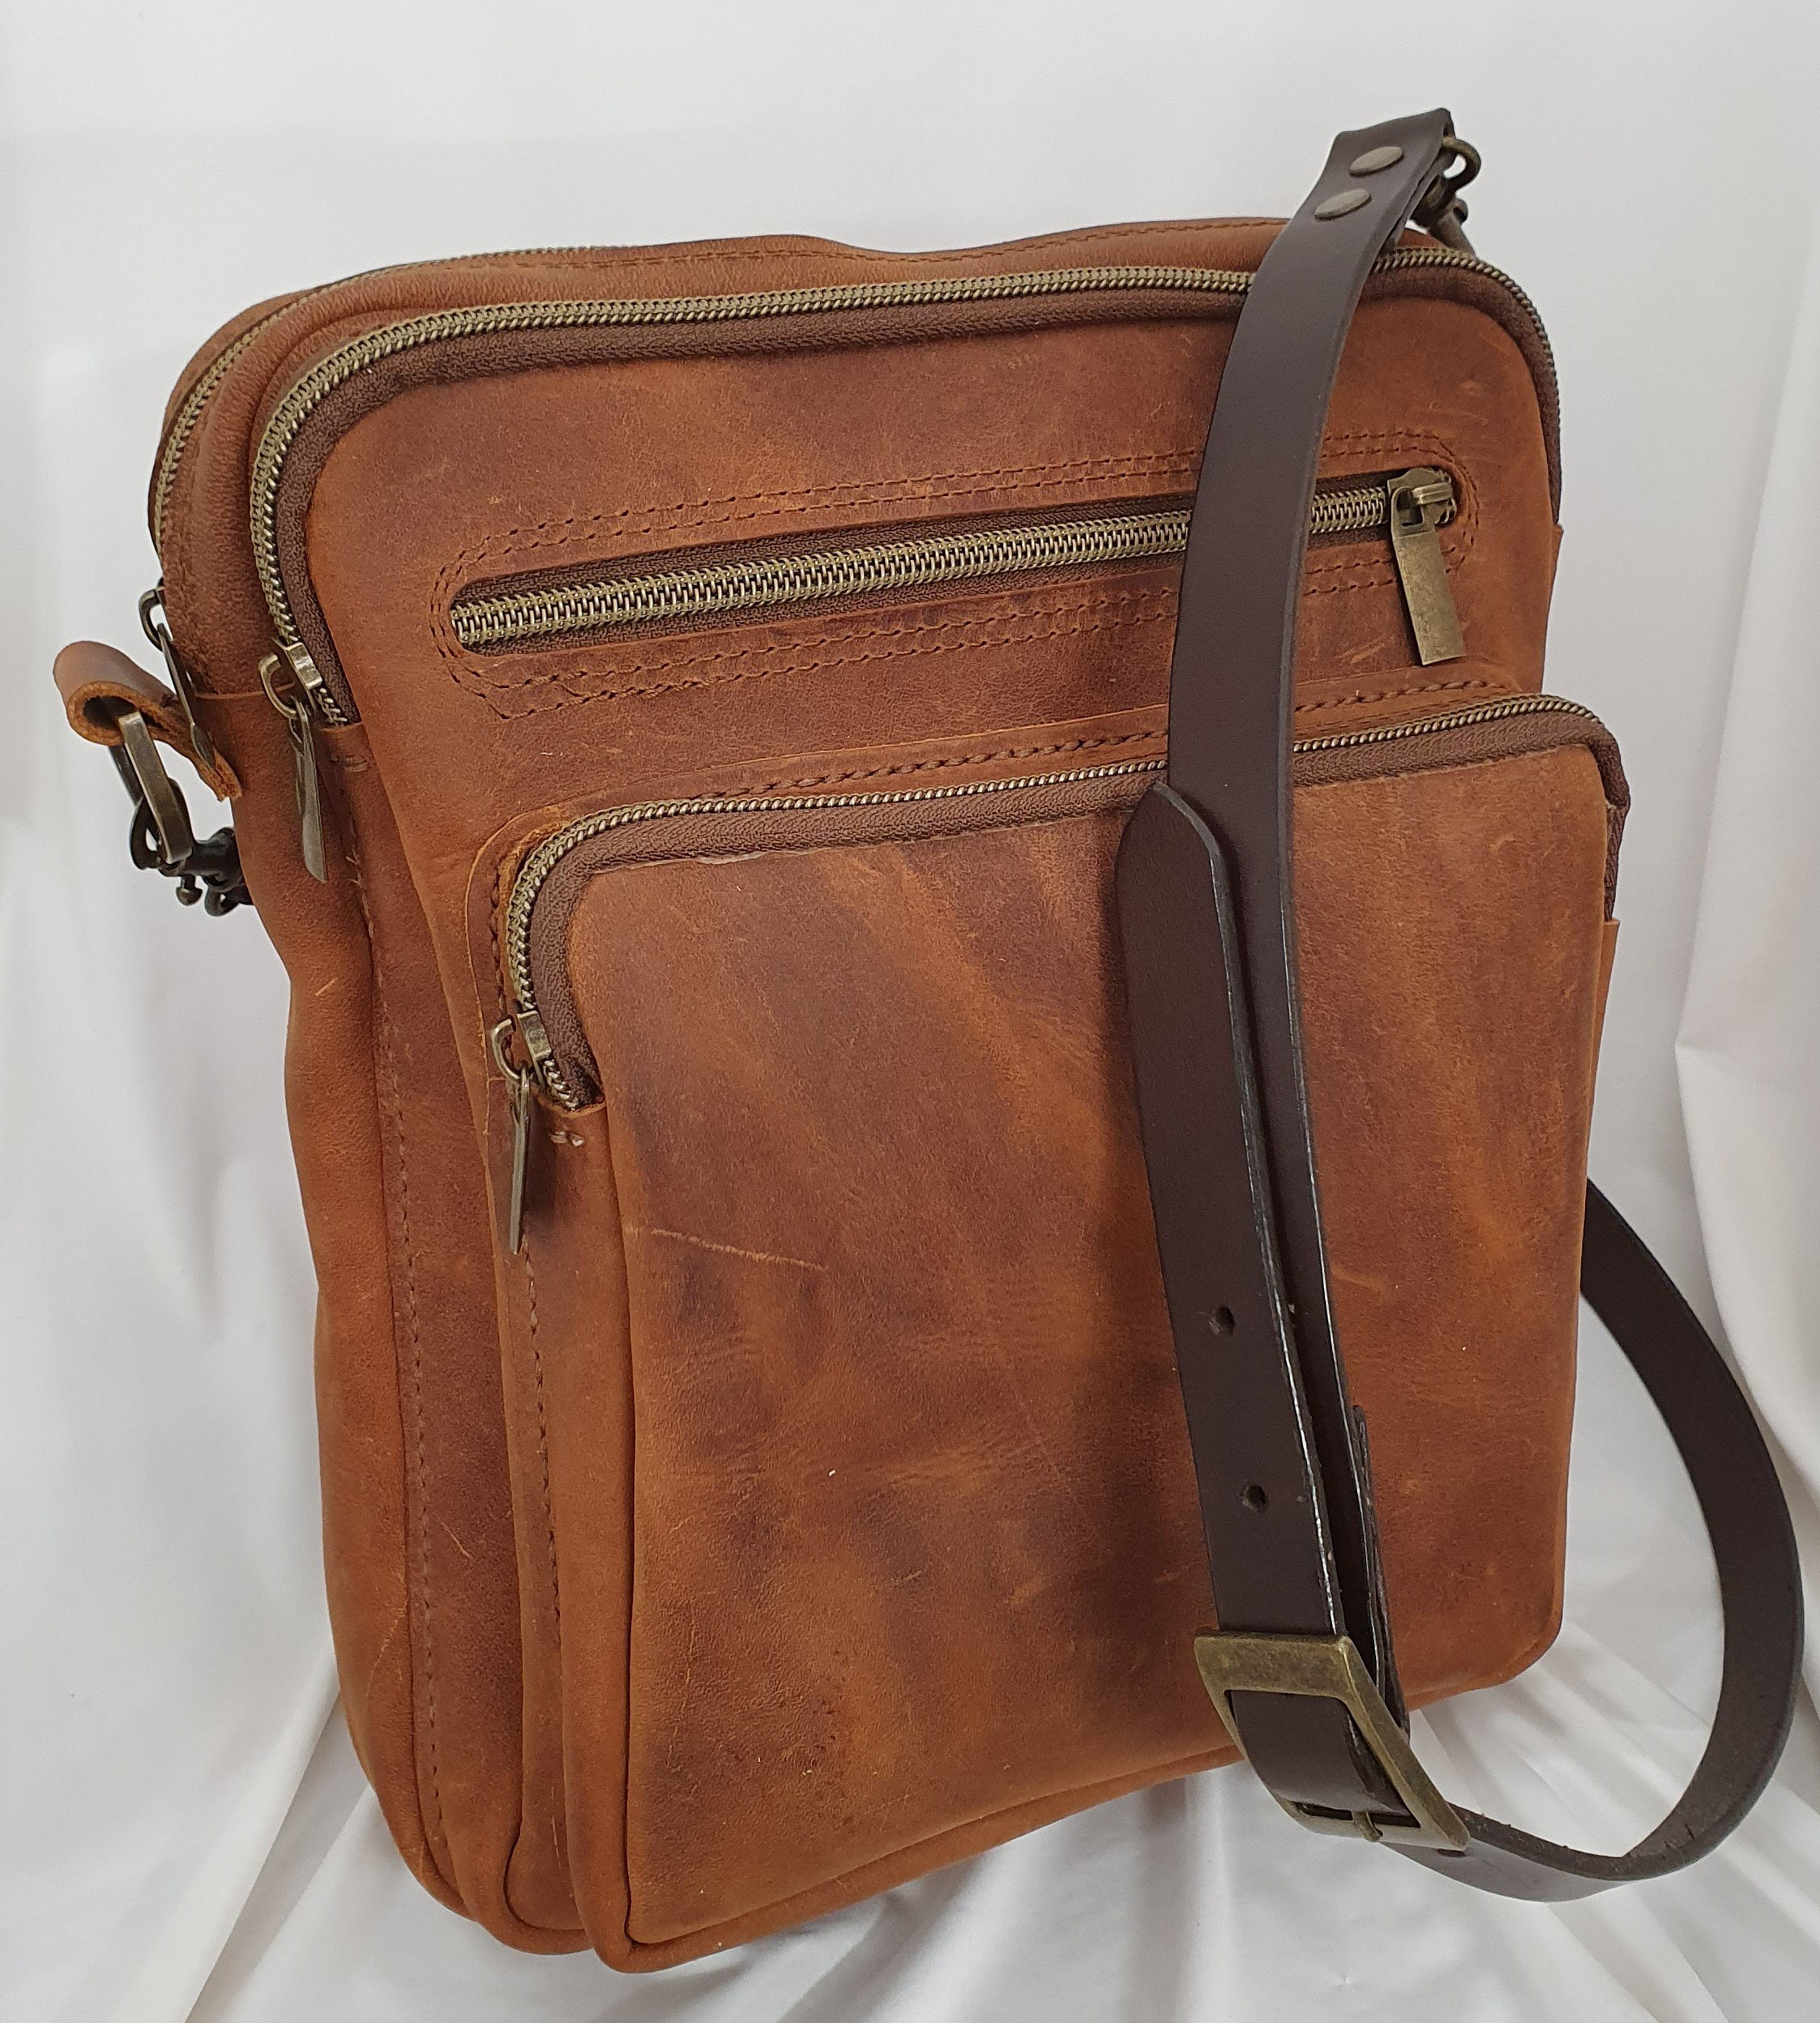 A beautiful bag by Colin with our new leathers